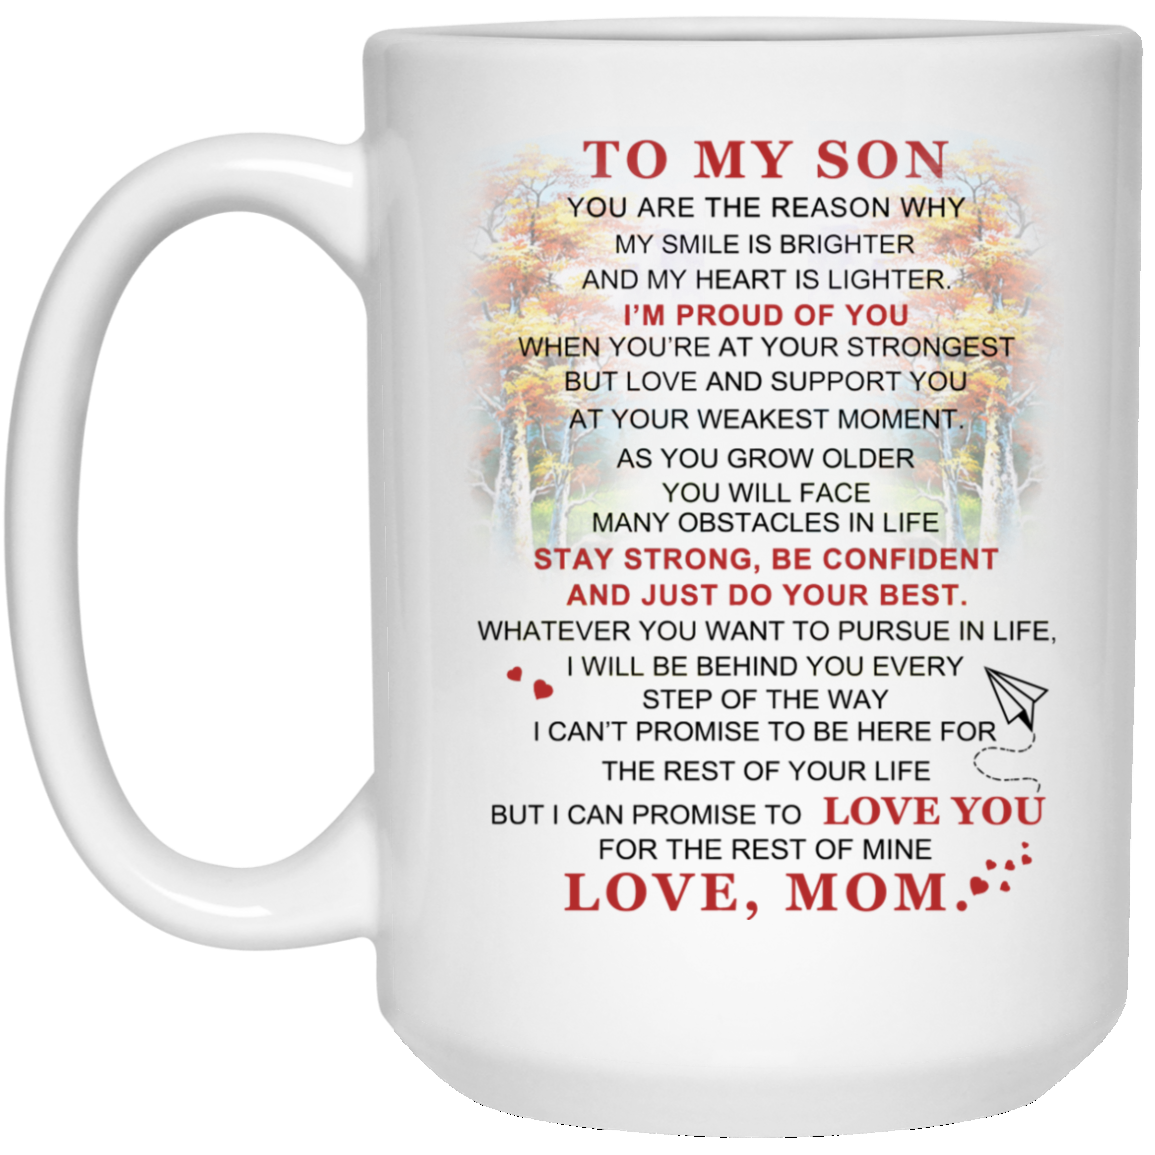 Mommy I'm Not Here Yet Mug Personalized Gift For Expecting Mom - Family  Panda - Unique gifting for family bonding